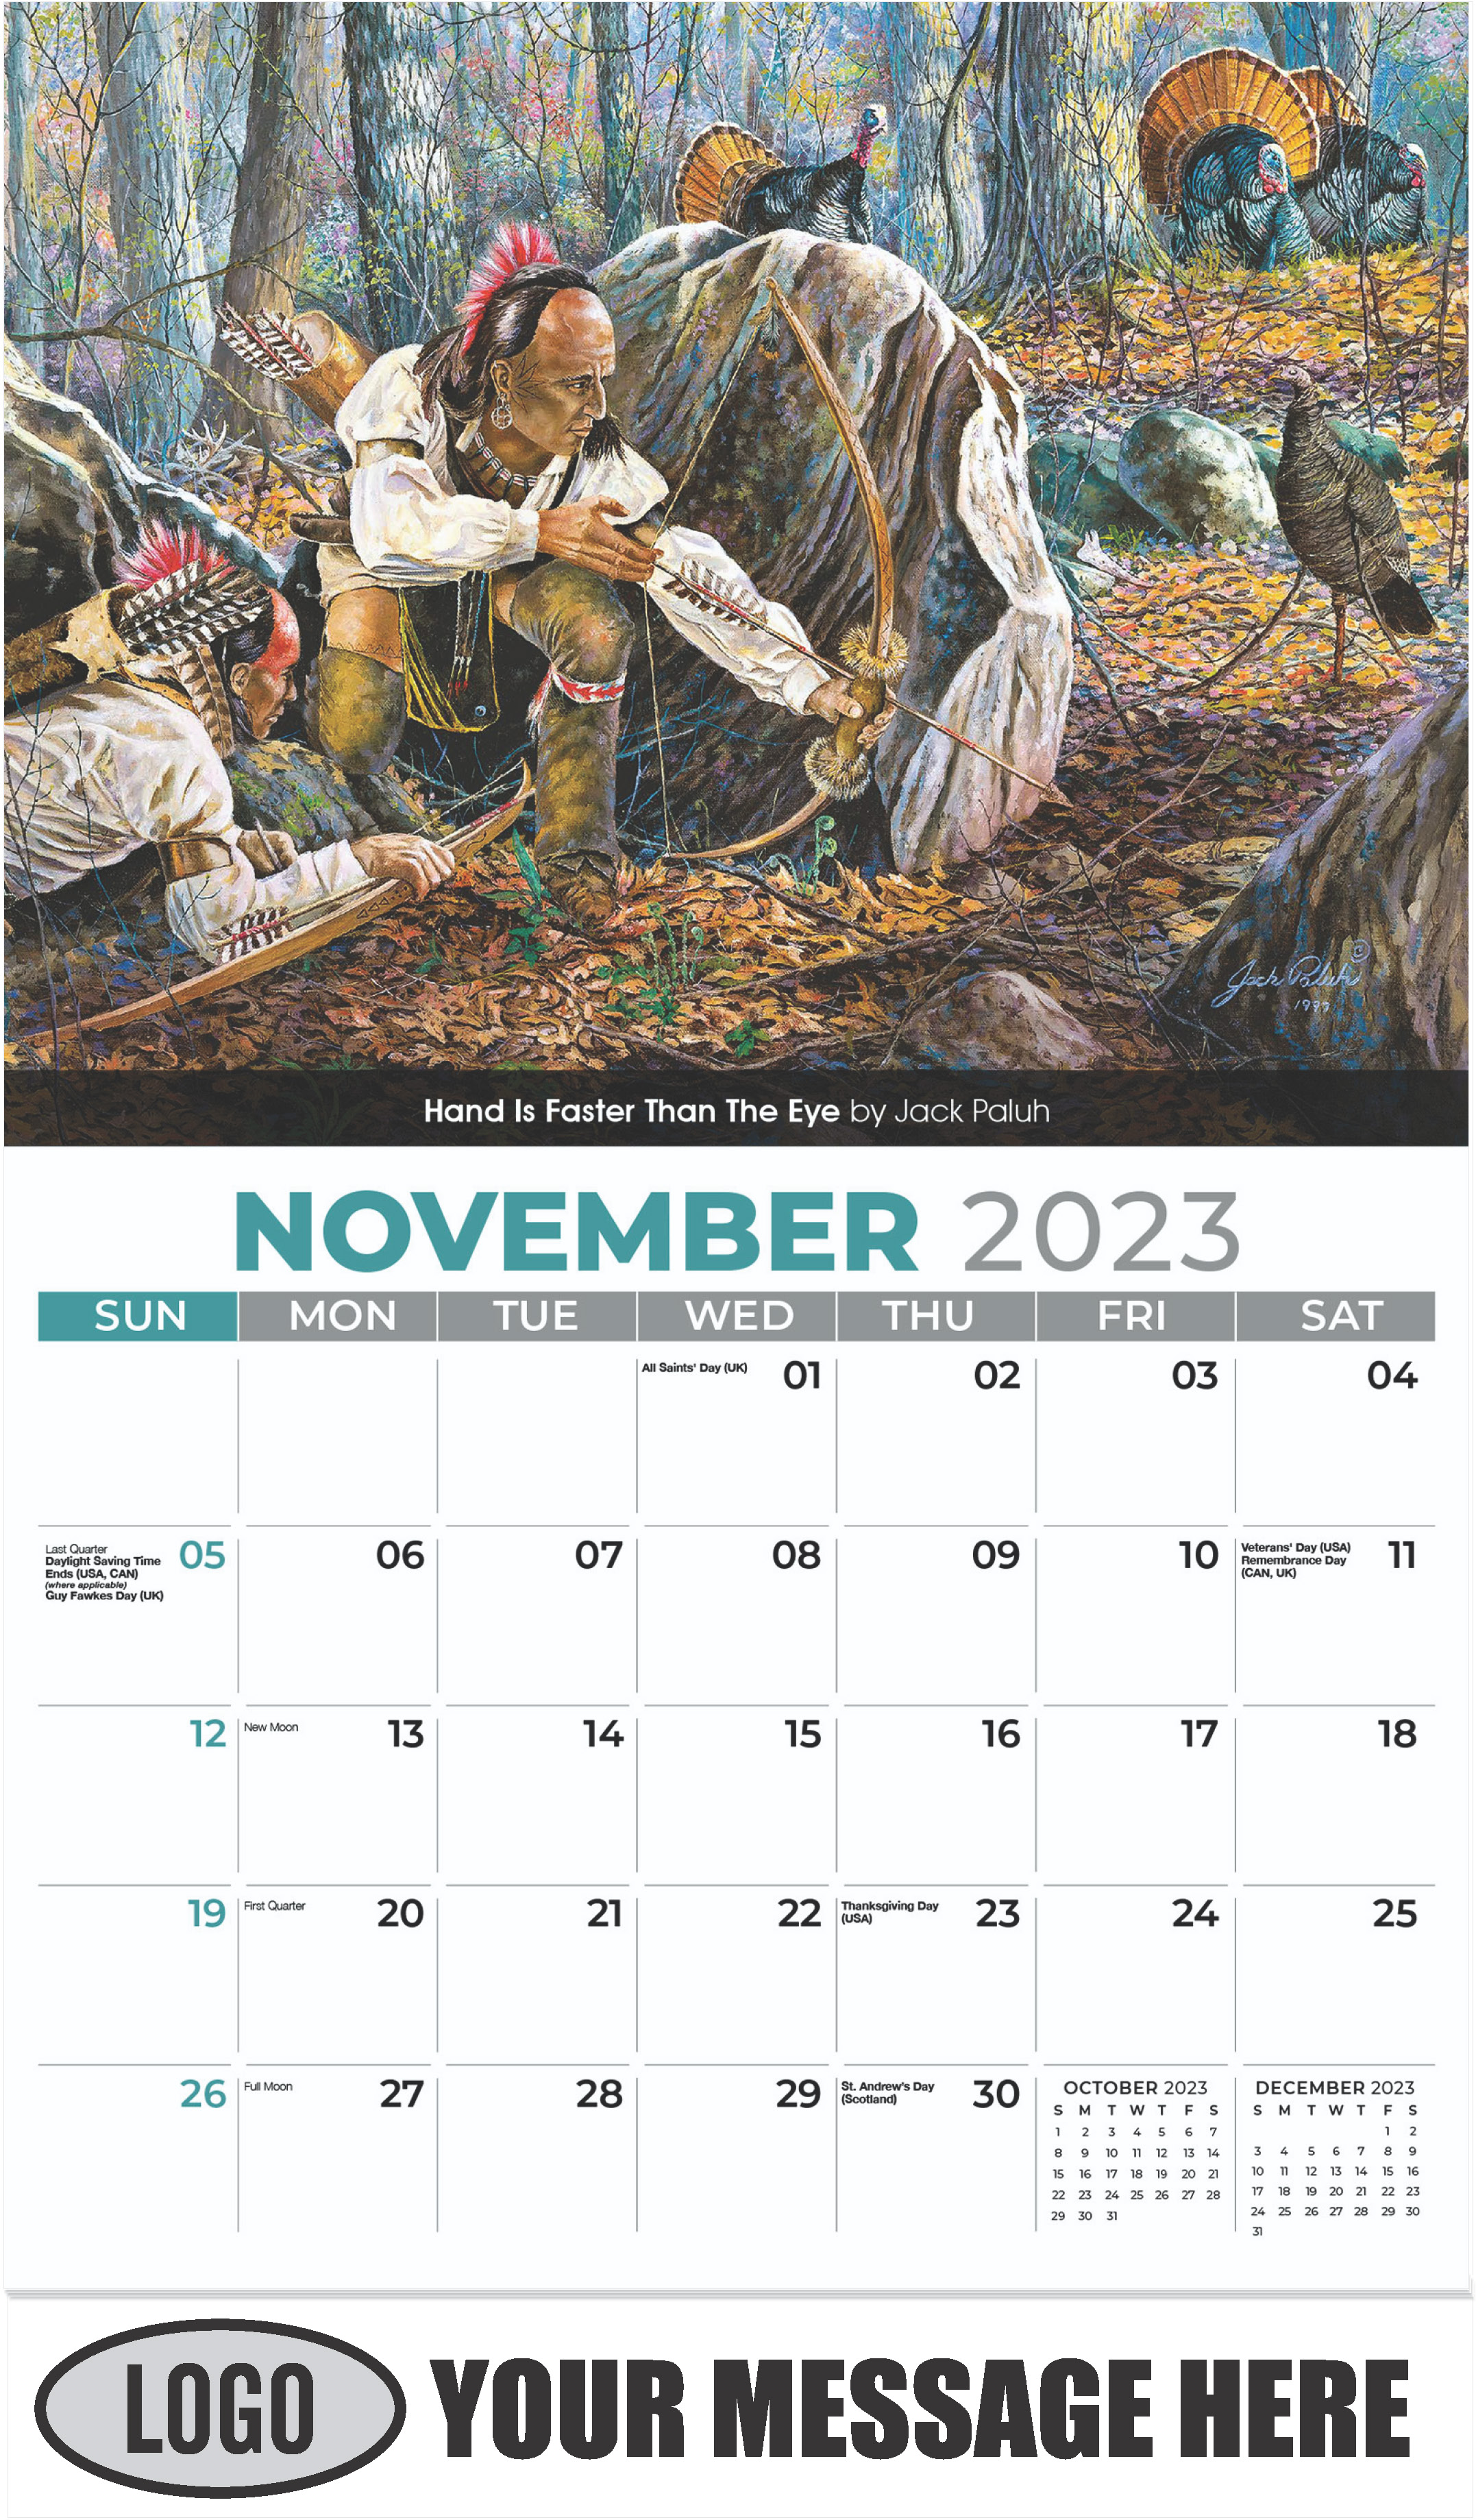 4 Hand Is Faster Than The-Eye by Jack Paluh - November - Spirit of the West 2023 Promotional Calendar